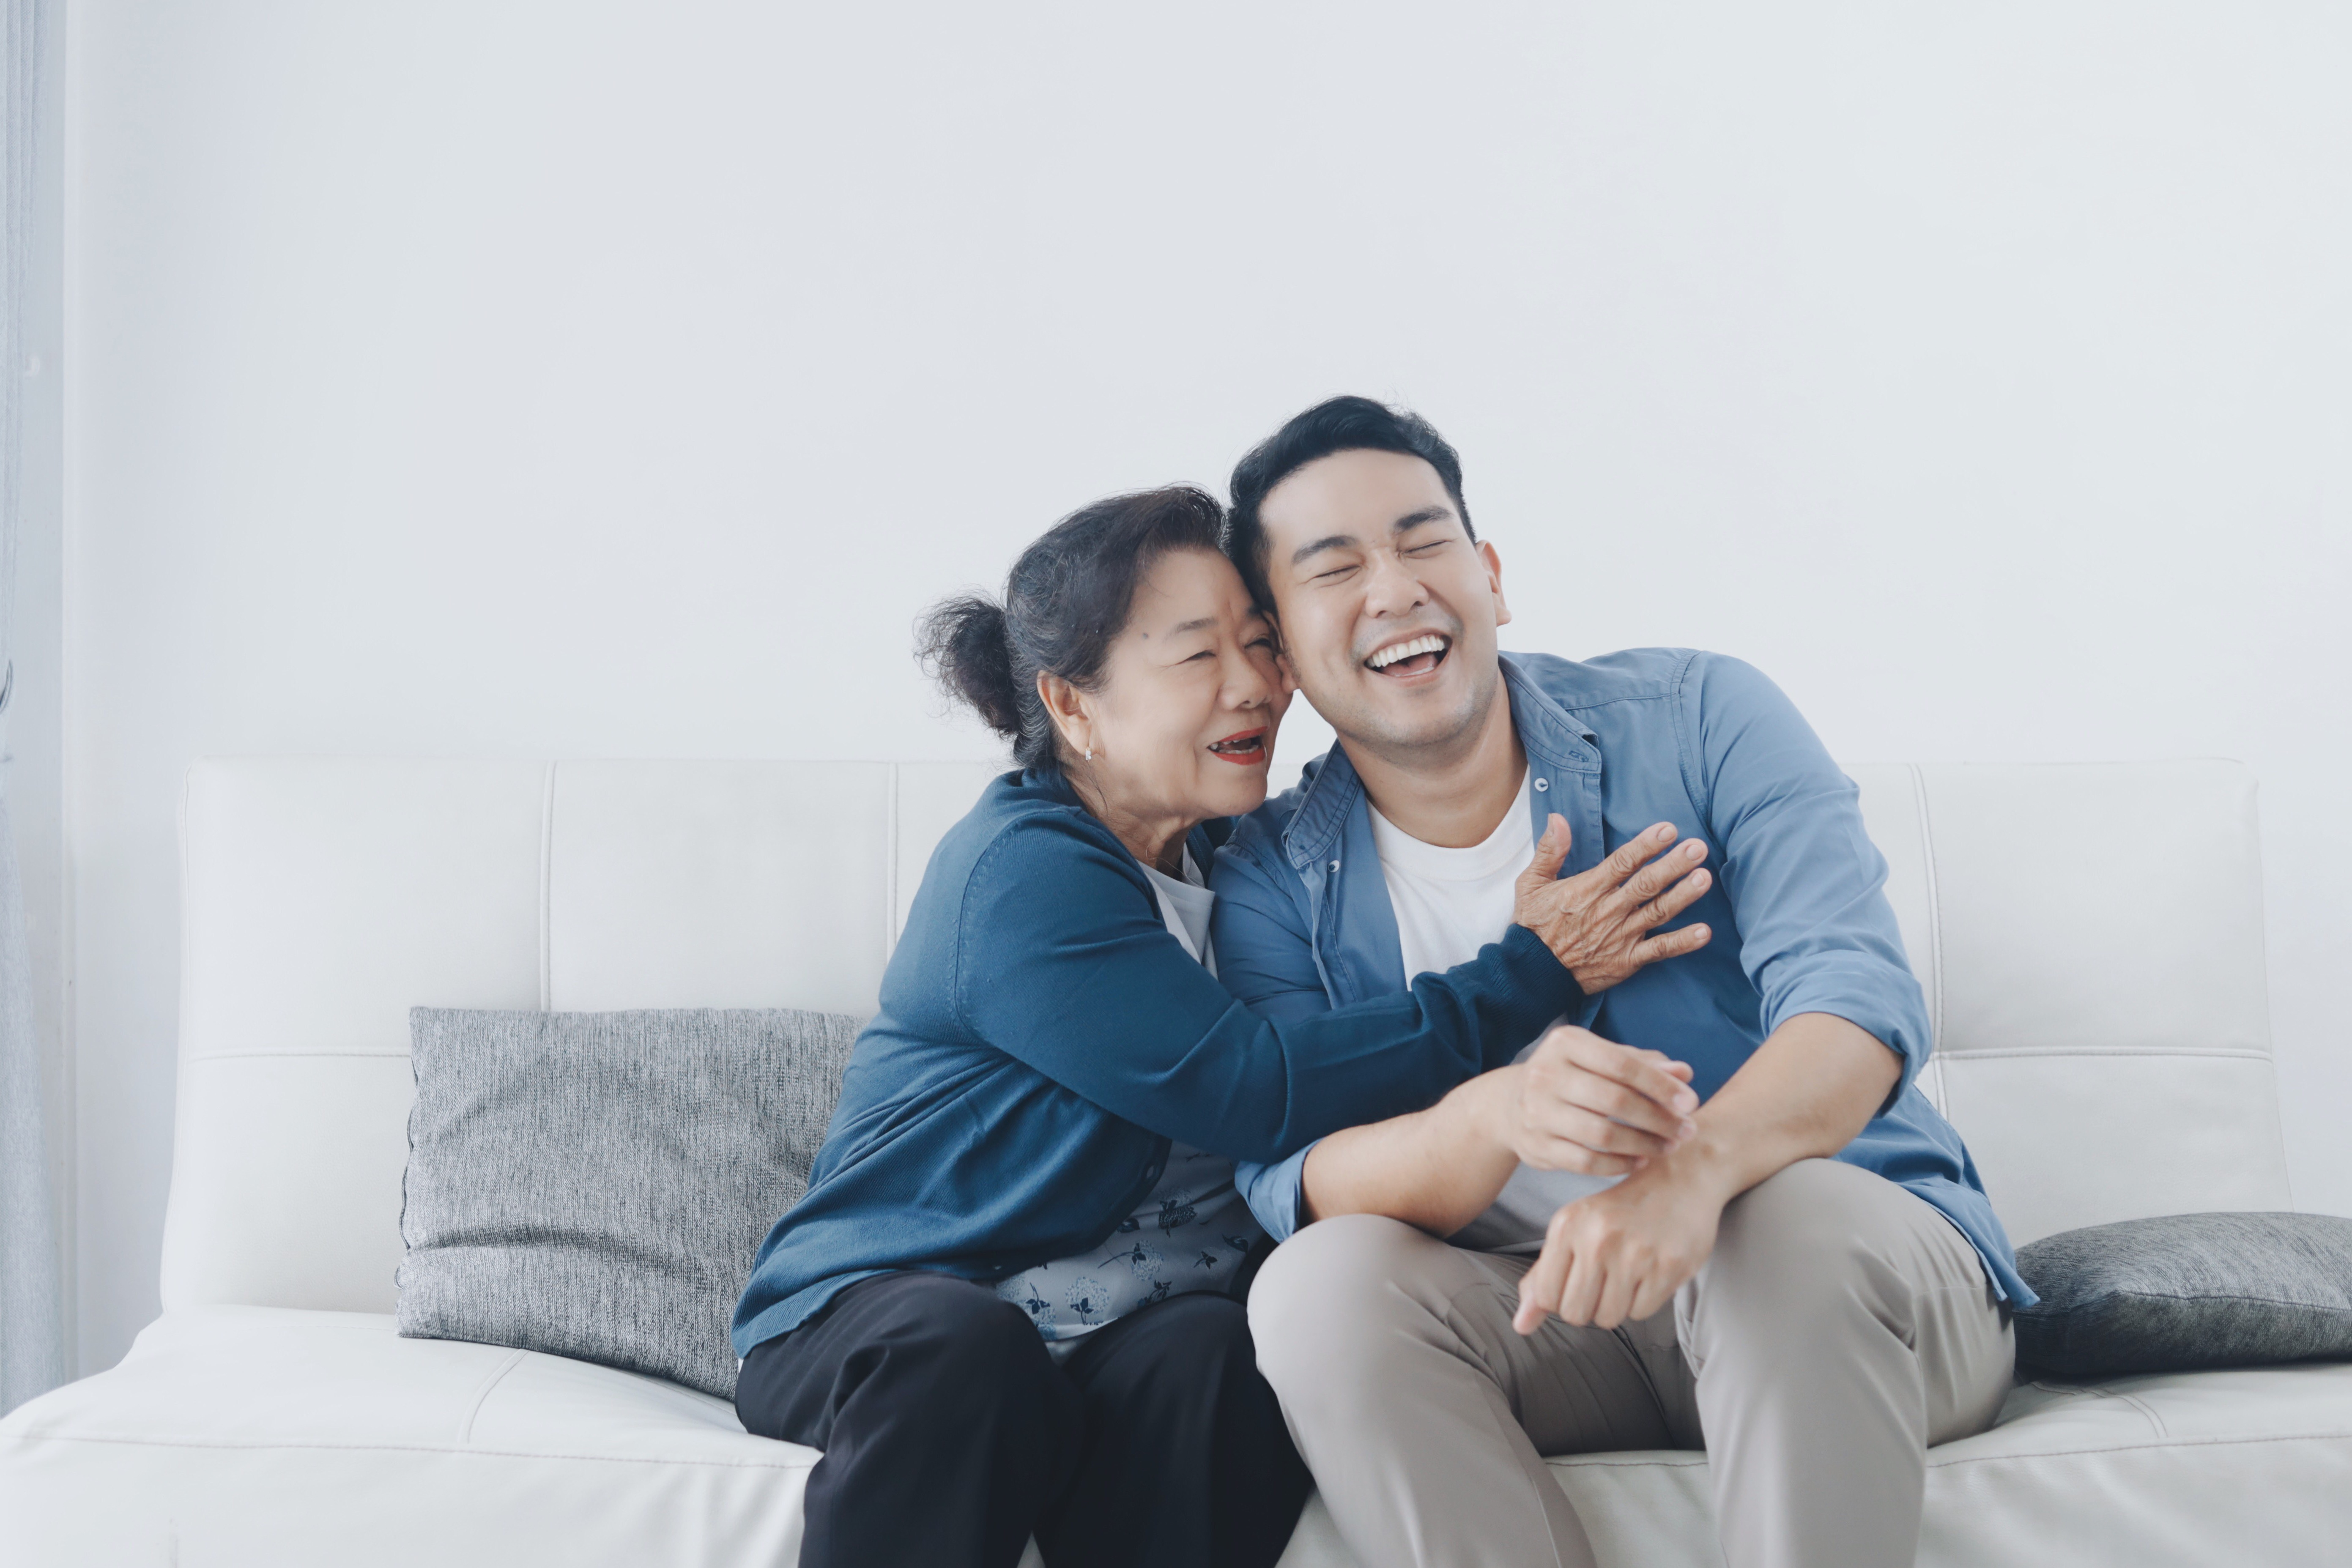 A happy senior Asian woman hugging her son | Source: Shutterstock